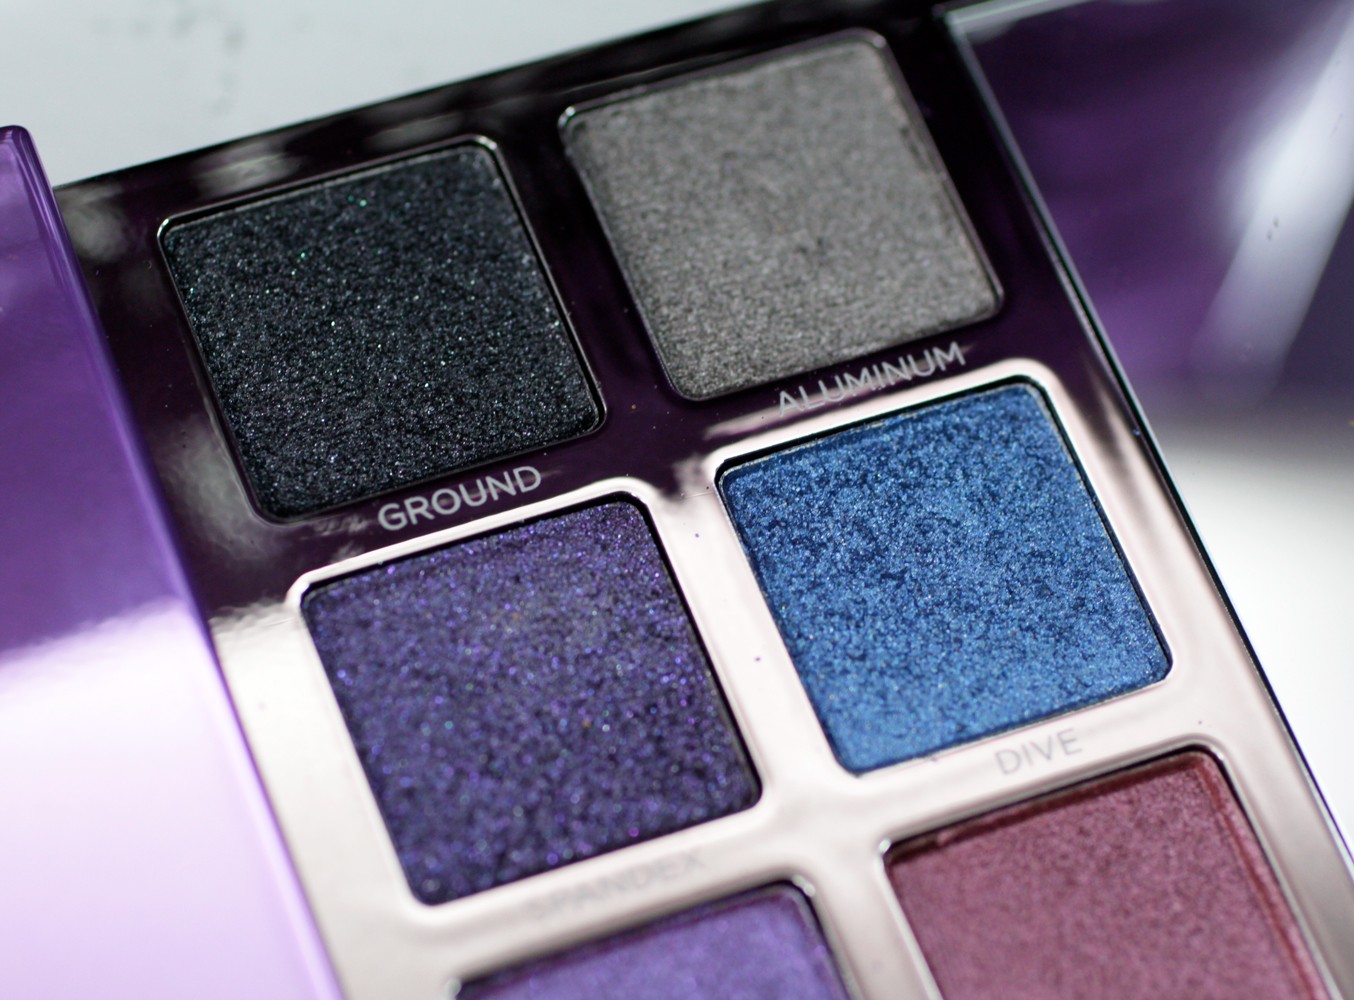 Urban Decay Heavy Metals Eyeshadow Palette - Ground and Aluminum - Urban Decay Heavy Metals Eyeshadow Palette review by popular Los Angeles cruelty free beauty blogger My Beauty Bunny